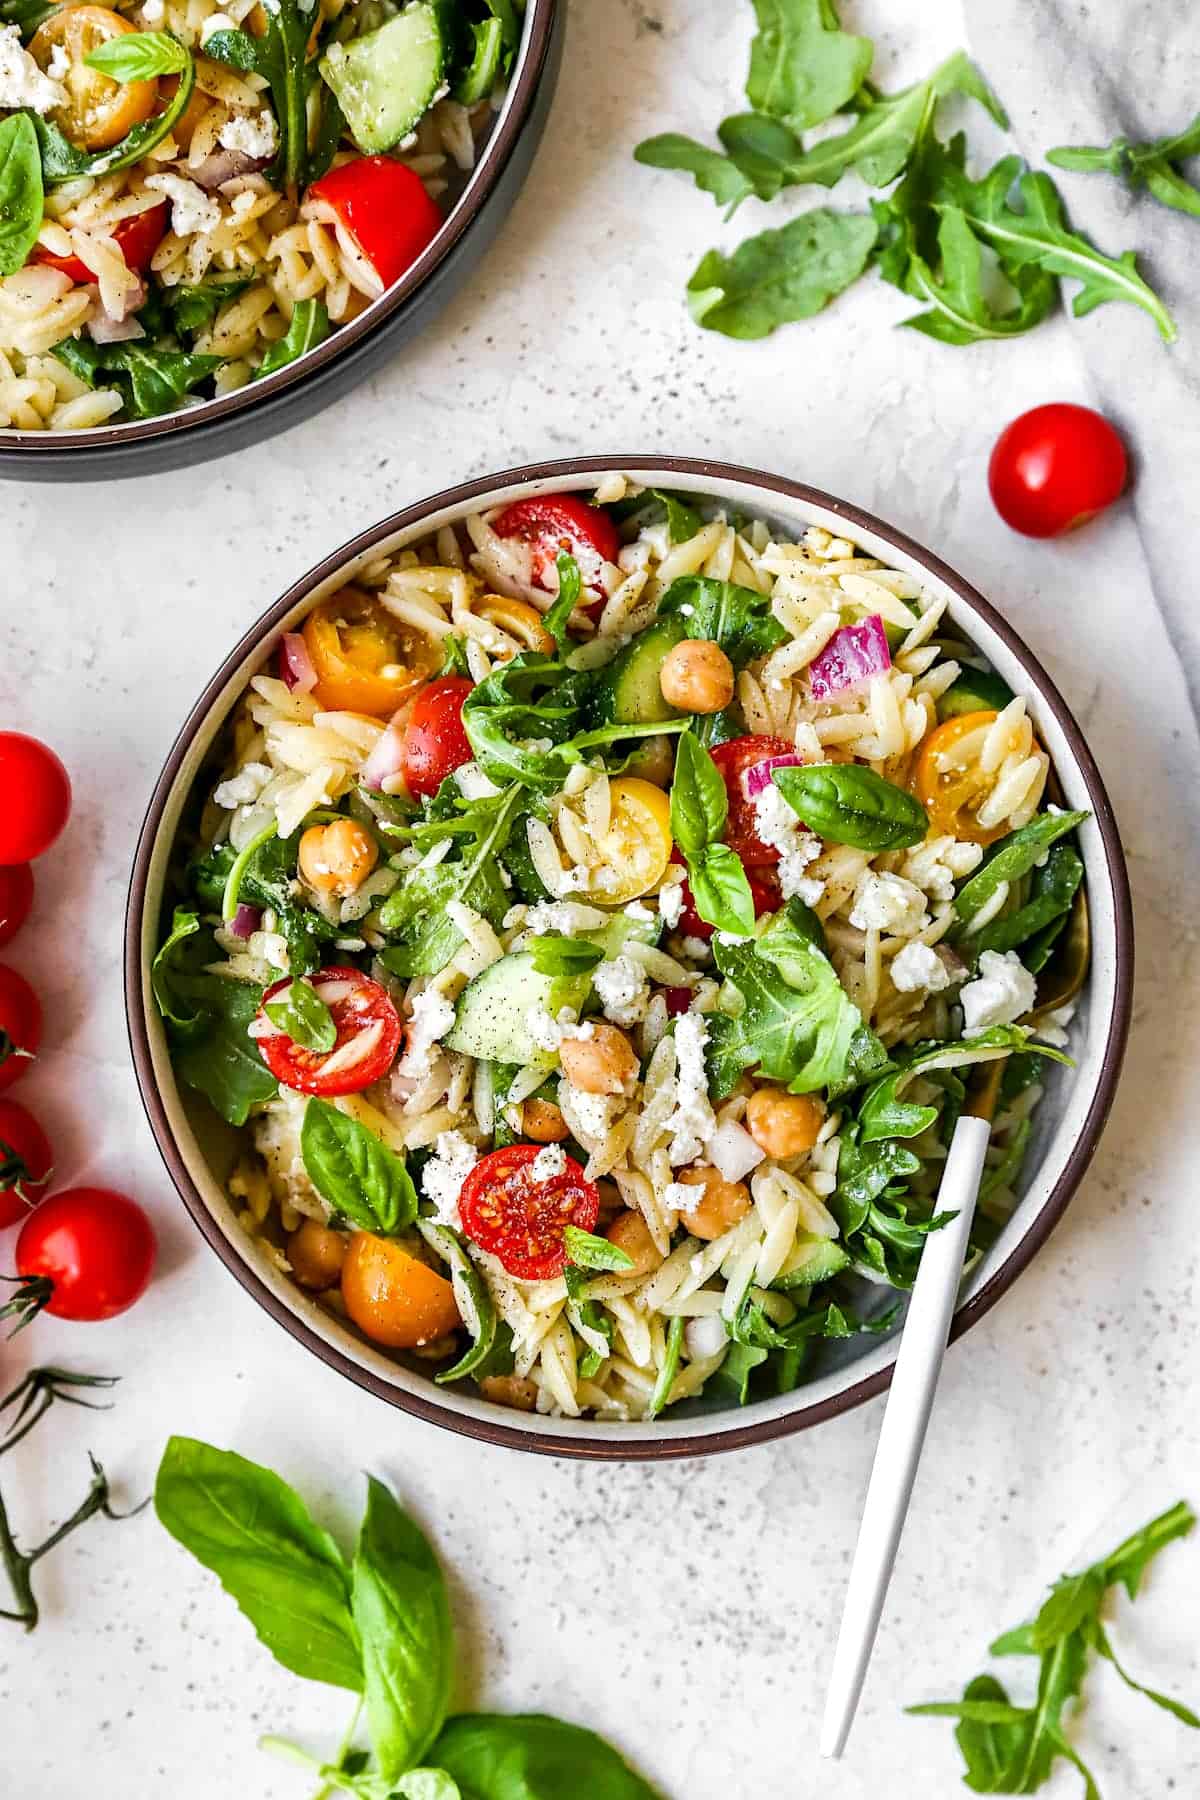 Orzo Salad with arugula, veggies, and feta in bowl with fork.